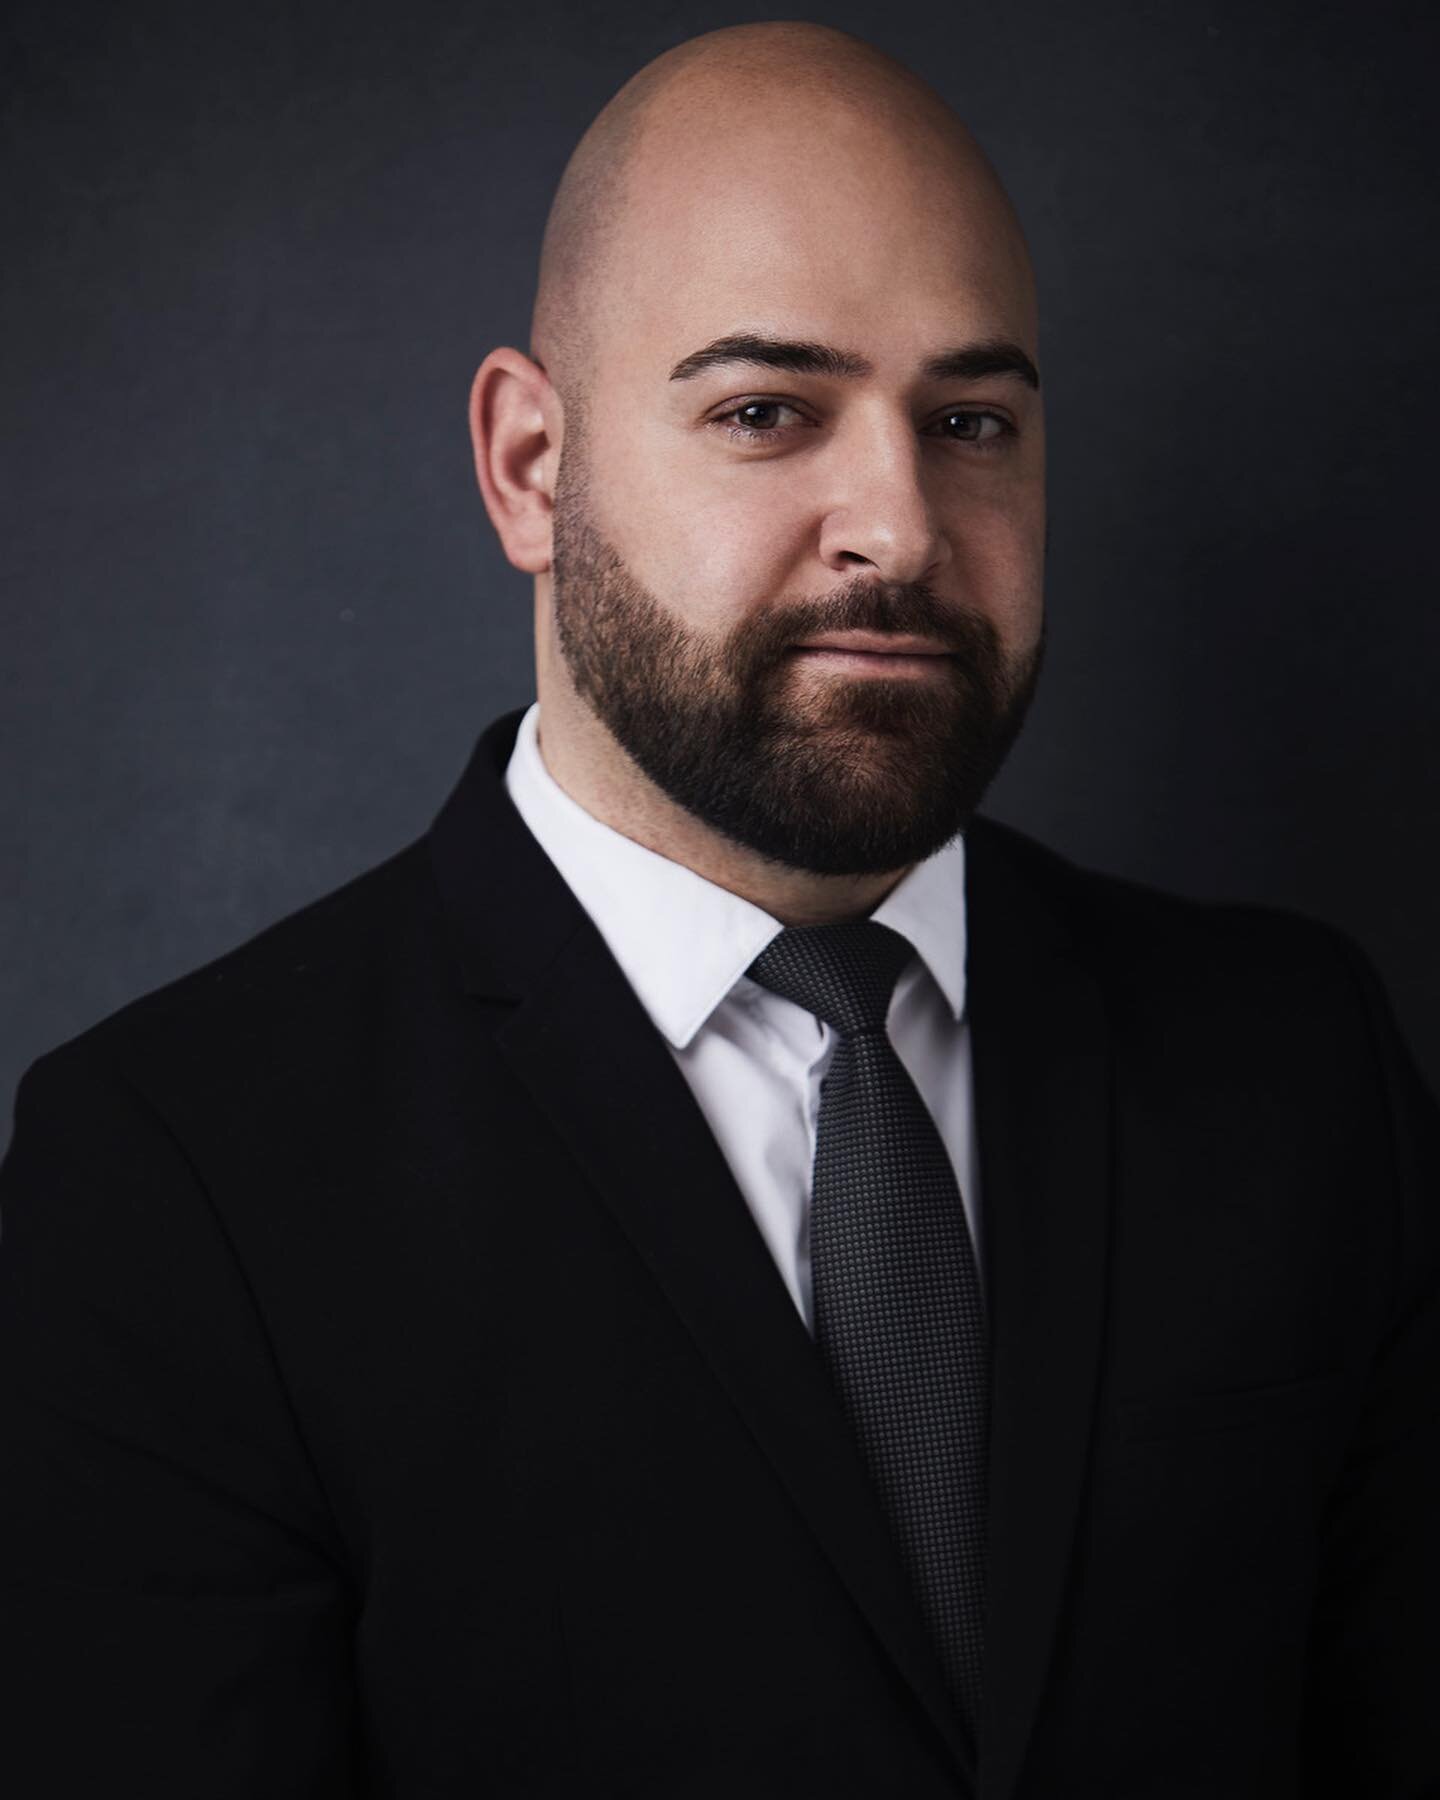 New @cz.law portraits 📸

#leanonleon #personalinjurylawyer #law #injurylaw #personalinjury #attorney #lawyer #lawyerlife #beverlyhills #losangeles #esq #california #caraccident #lawfirm #legal #accident #personalinjuryattorney #lawyers #justice #law